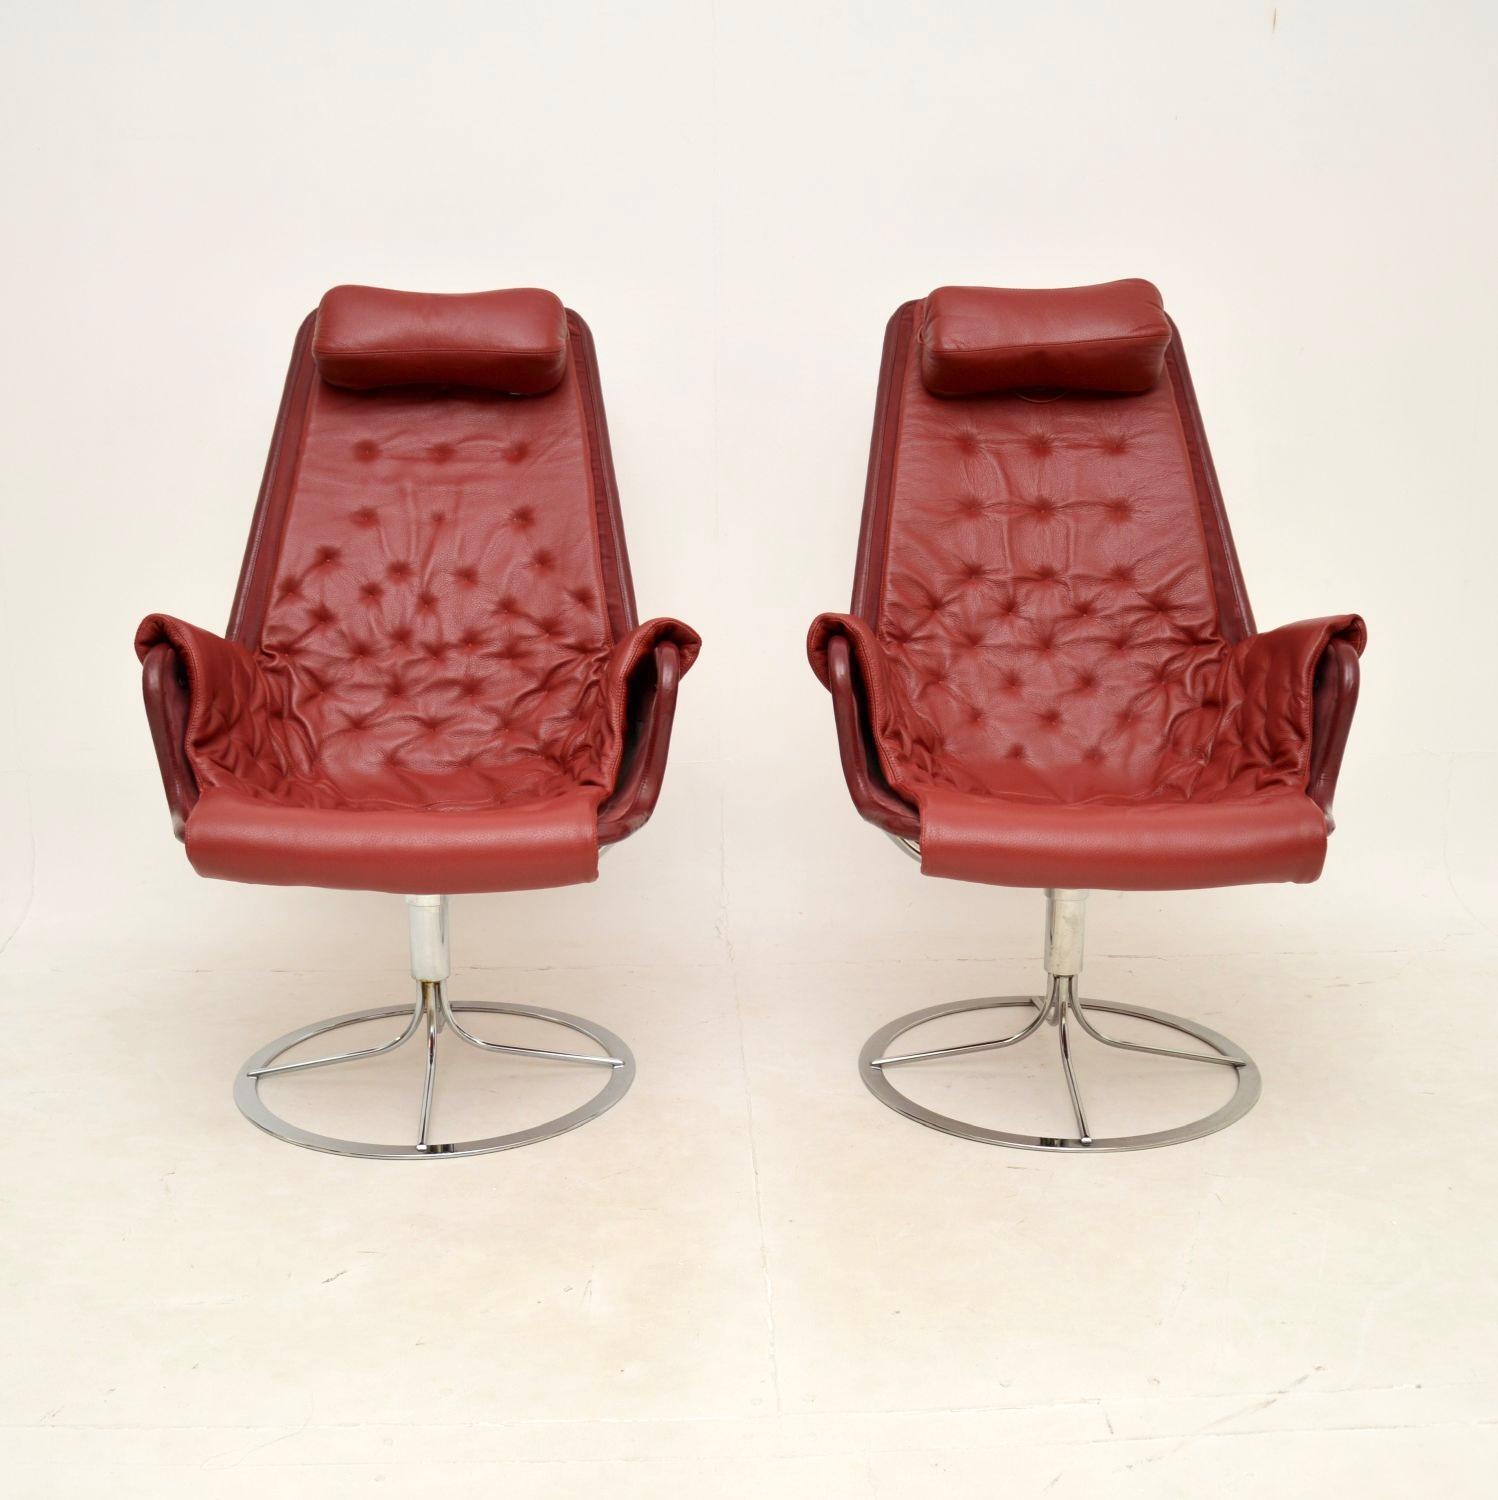 A beautiful and iconic design, this is a pair of vintage Jetson swivel armchairs by Bruno Mathsson for Dux. They made in Sweden and were recently imported, they date from around the 1970’s.

They are of outstanding quality and are extremely